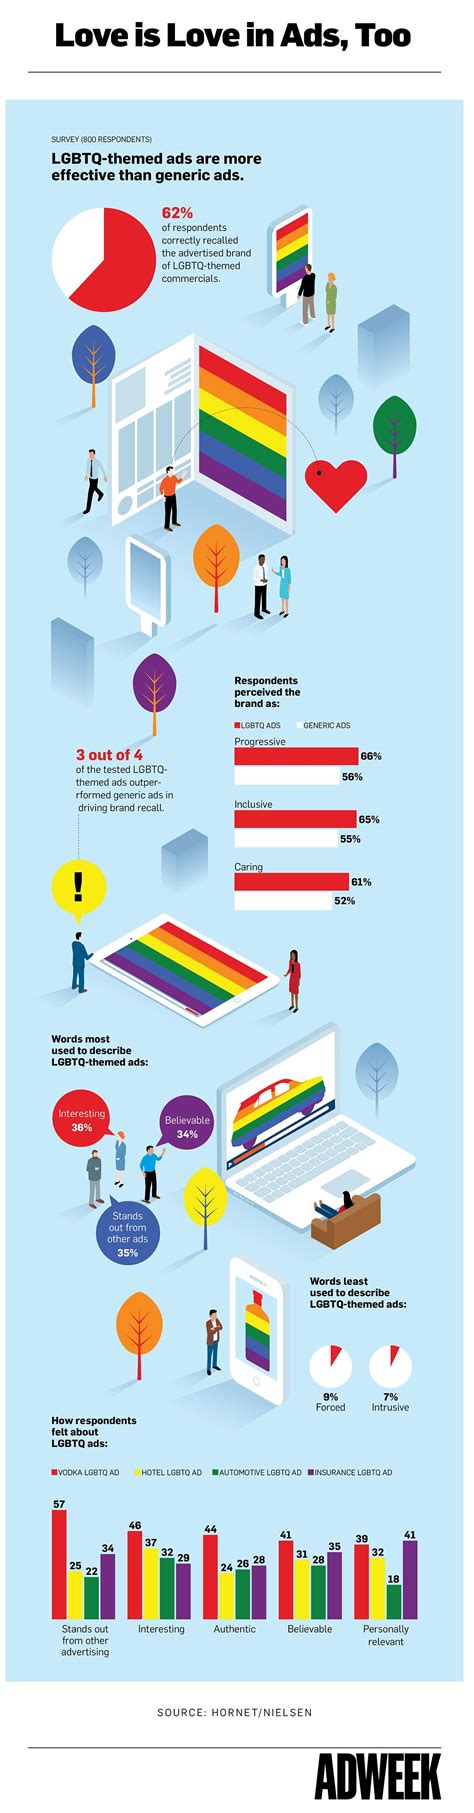 infographic how consumers perceive and respond to lgbtq